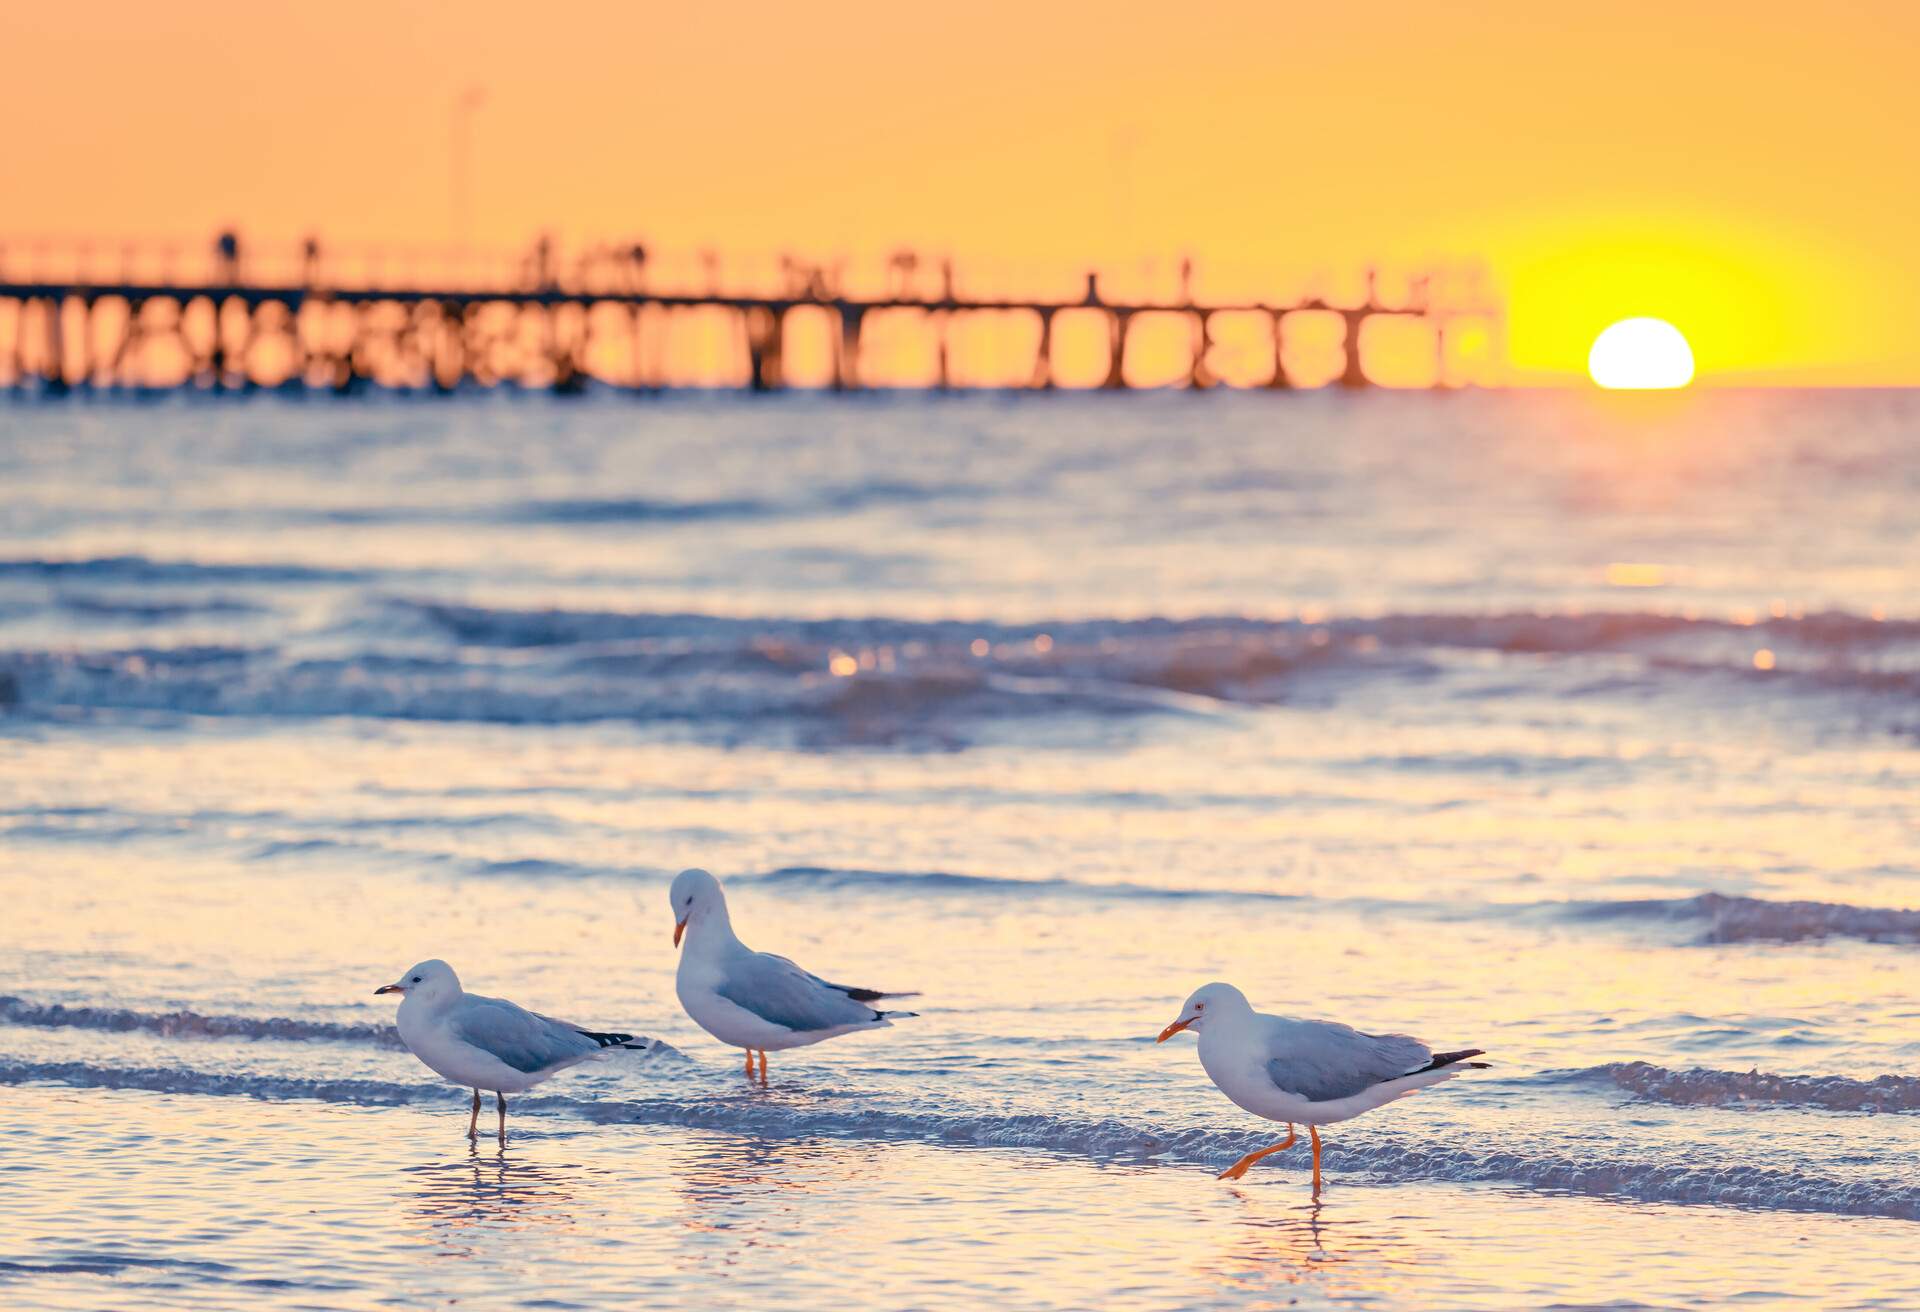 Seagulls at Semaphore Beach with pier on the background at sunset, South Australia